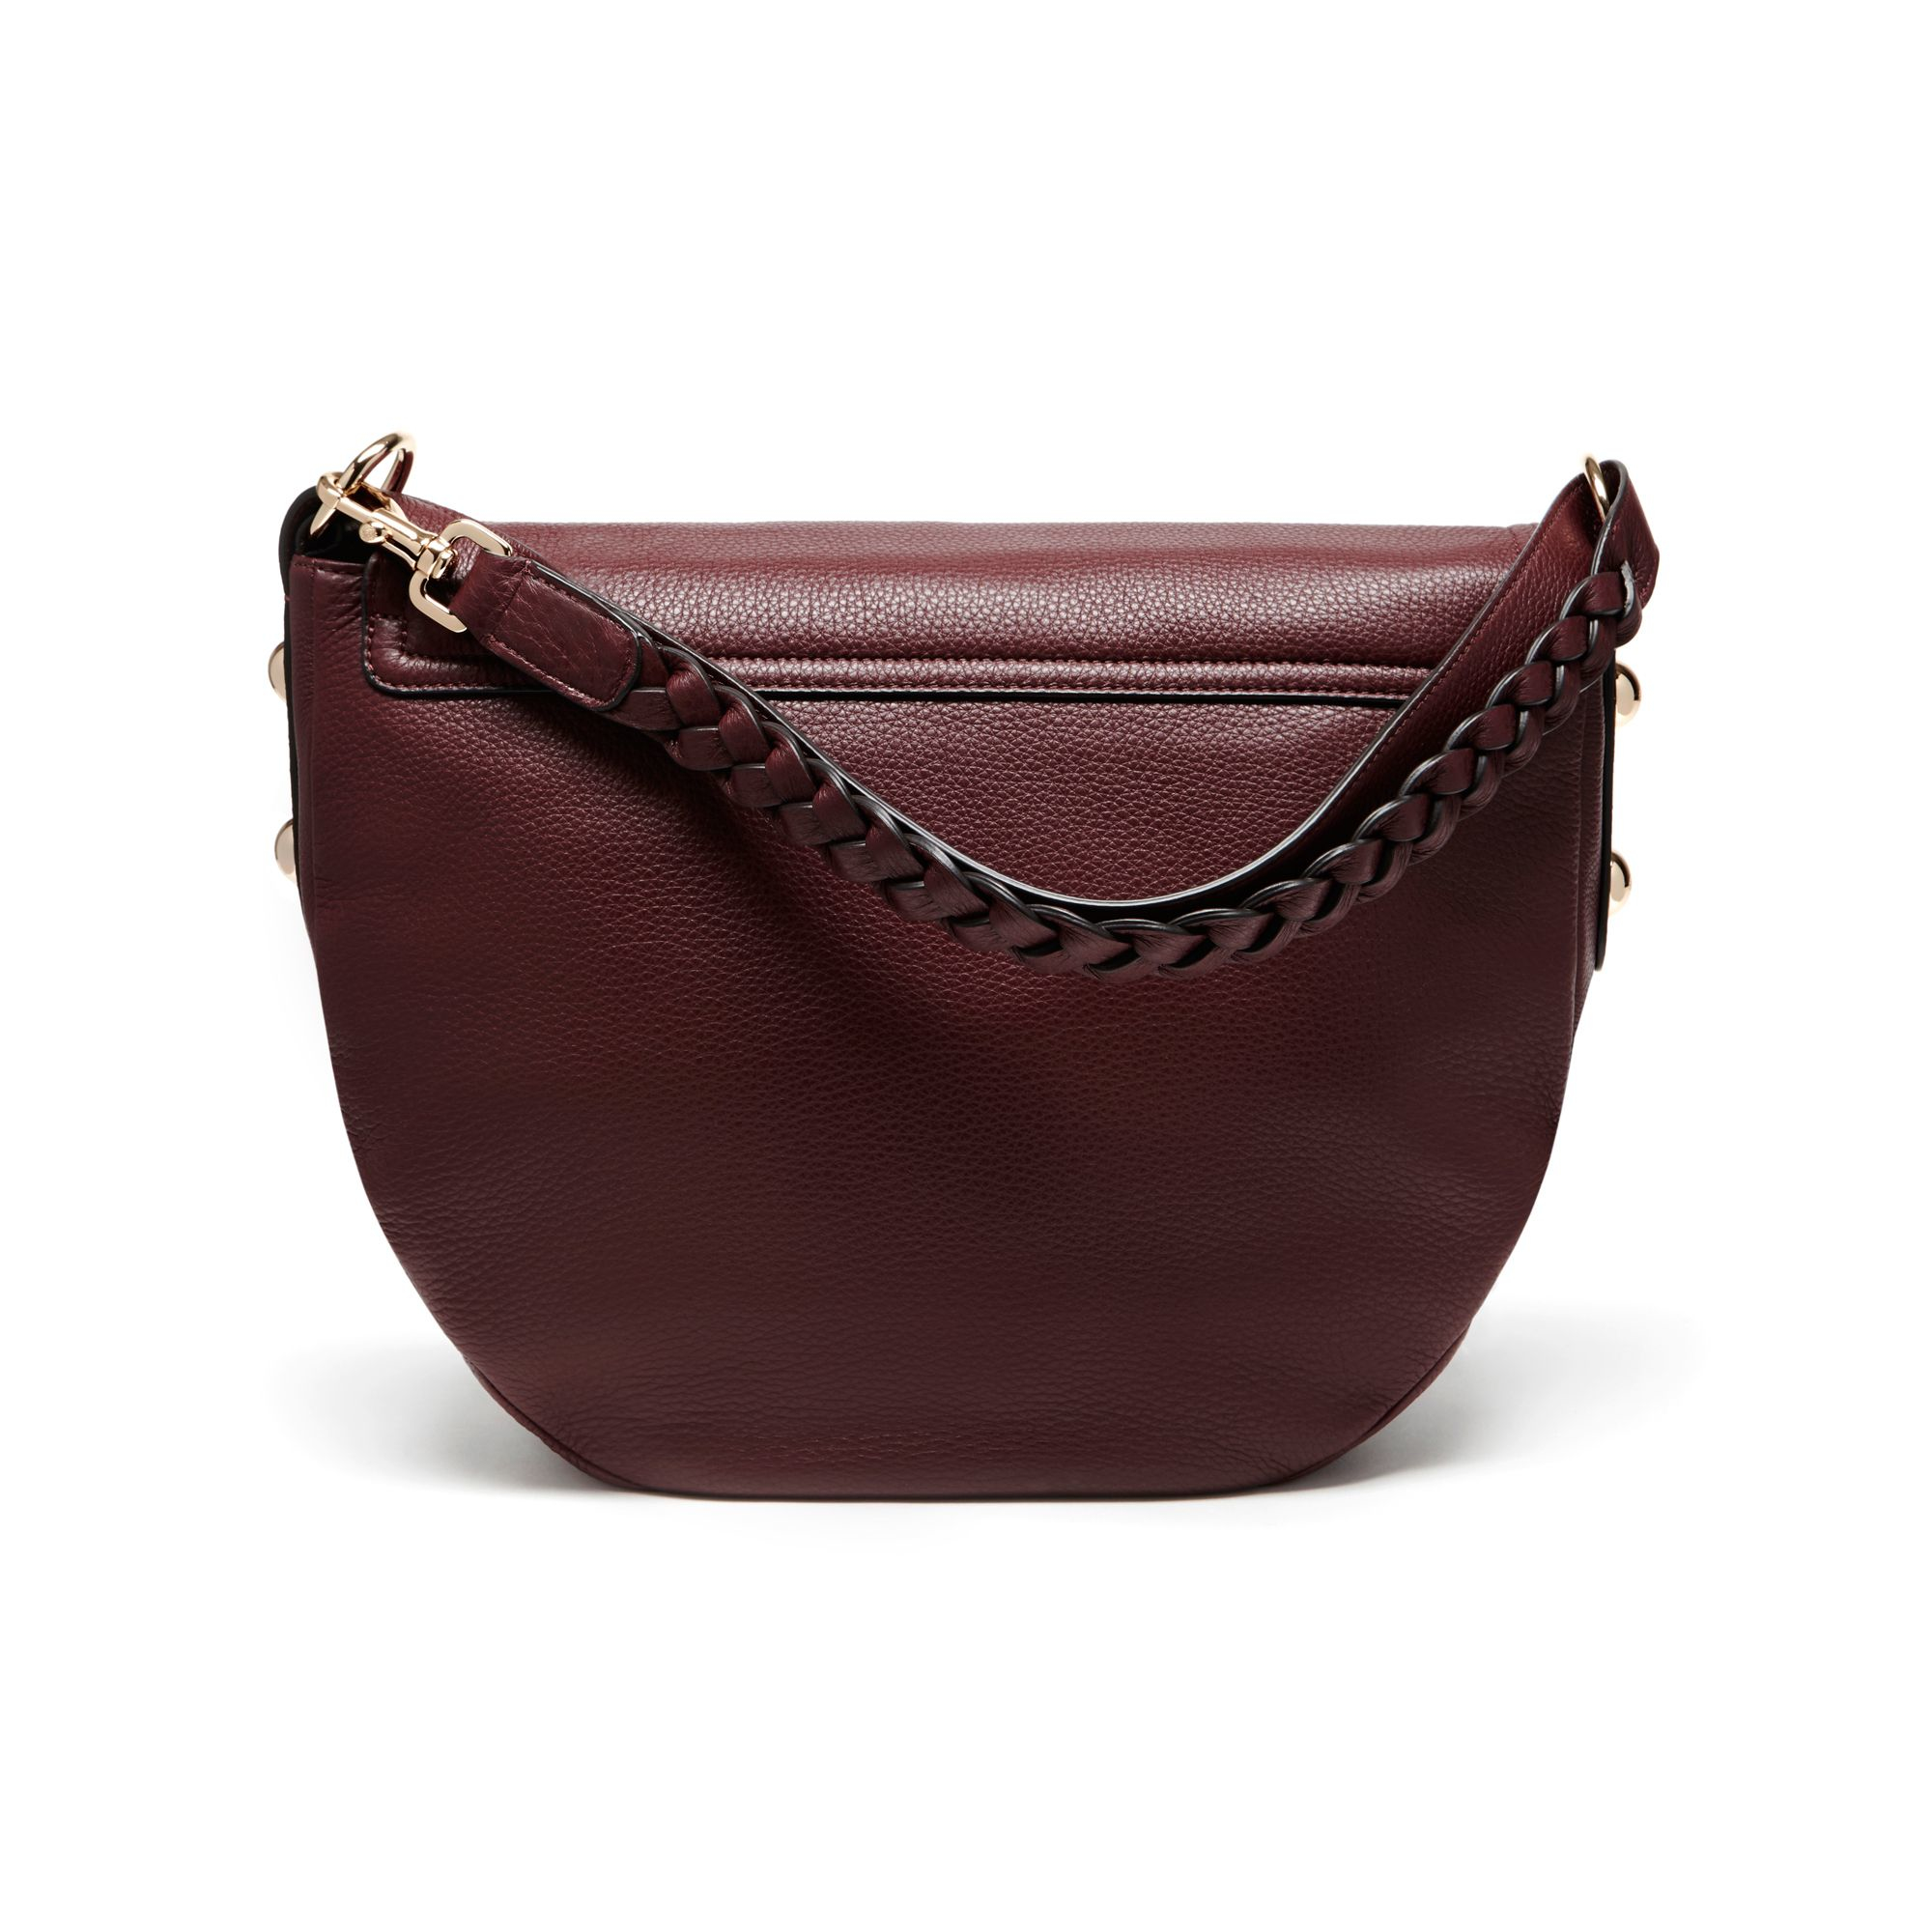 Mulberry Leather Daria Satchel in Oxblood (Red) - Lyst